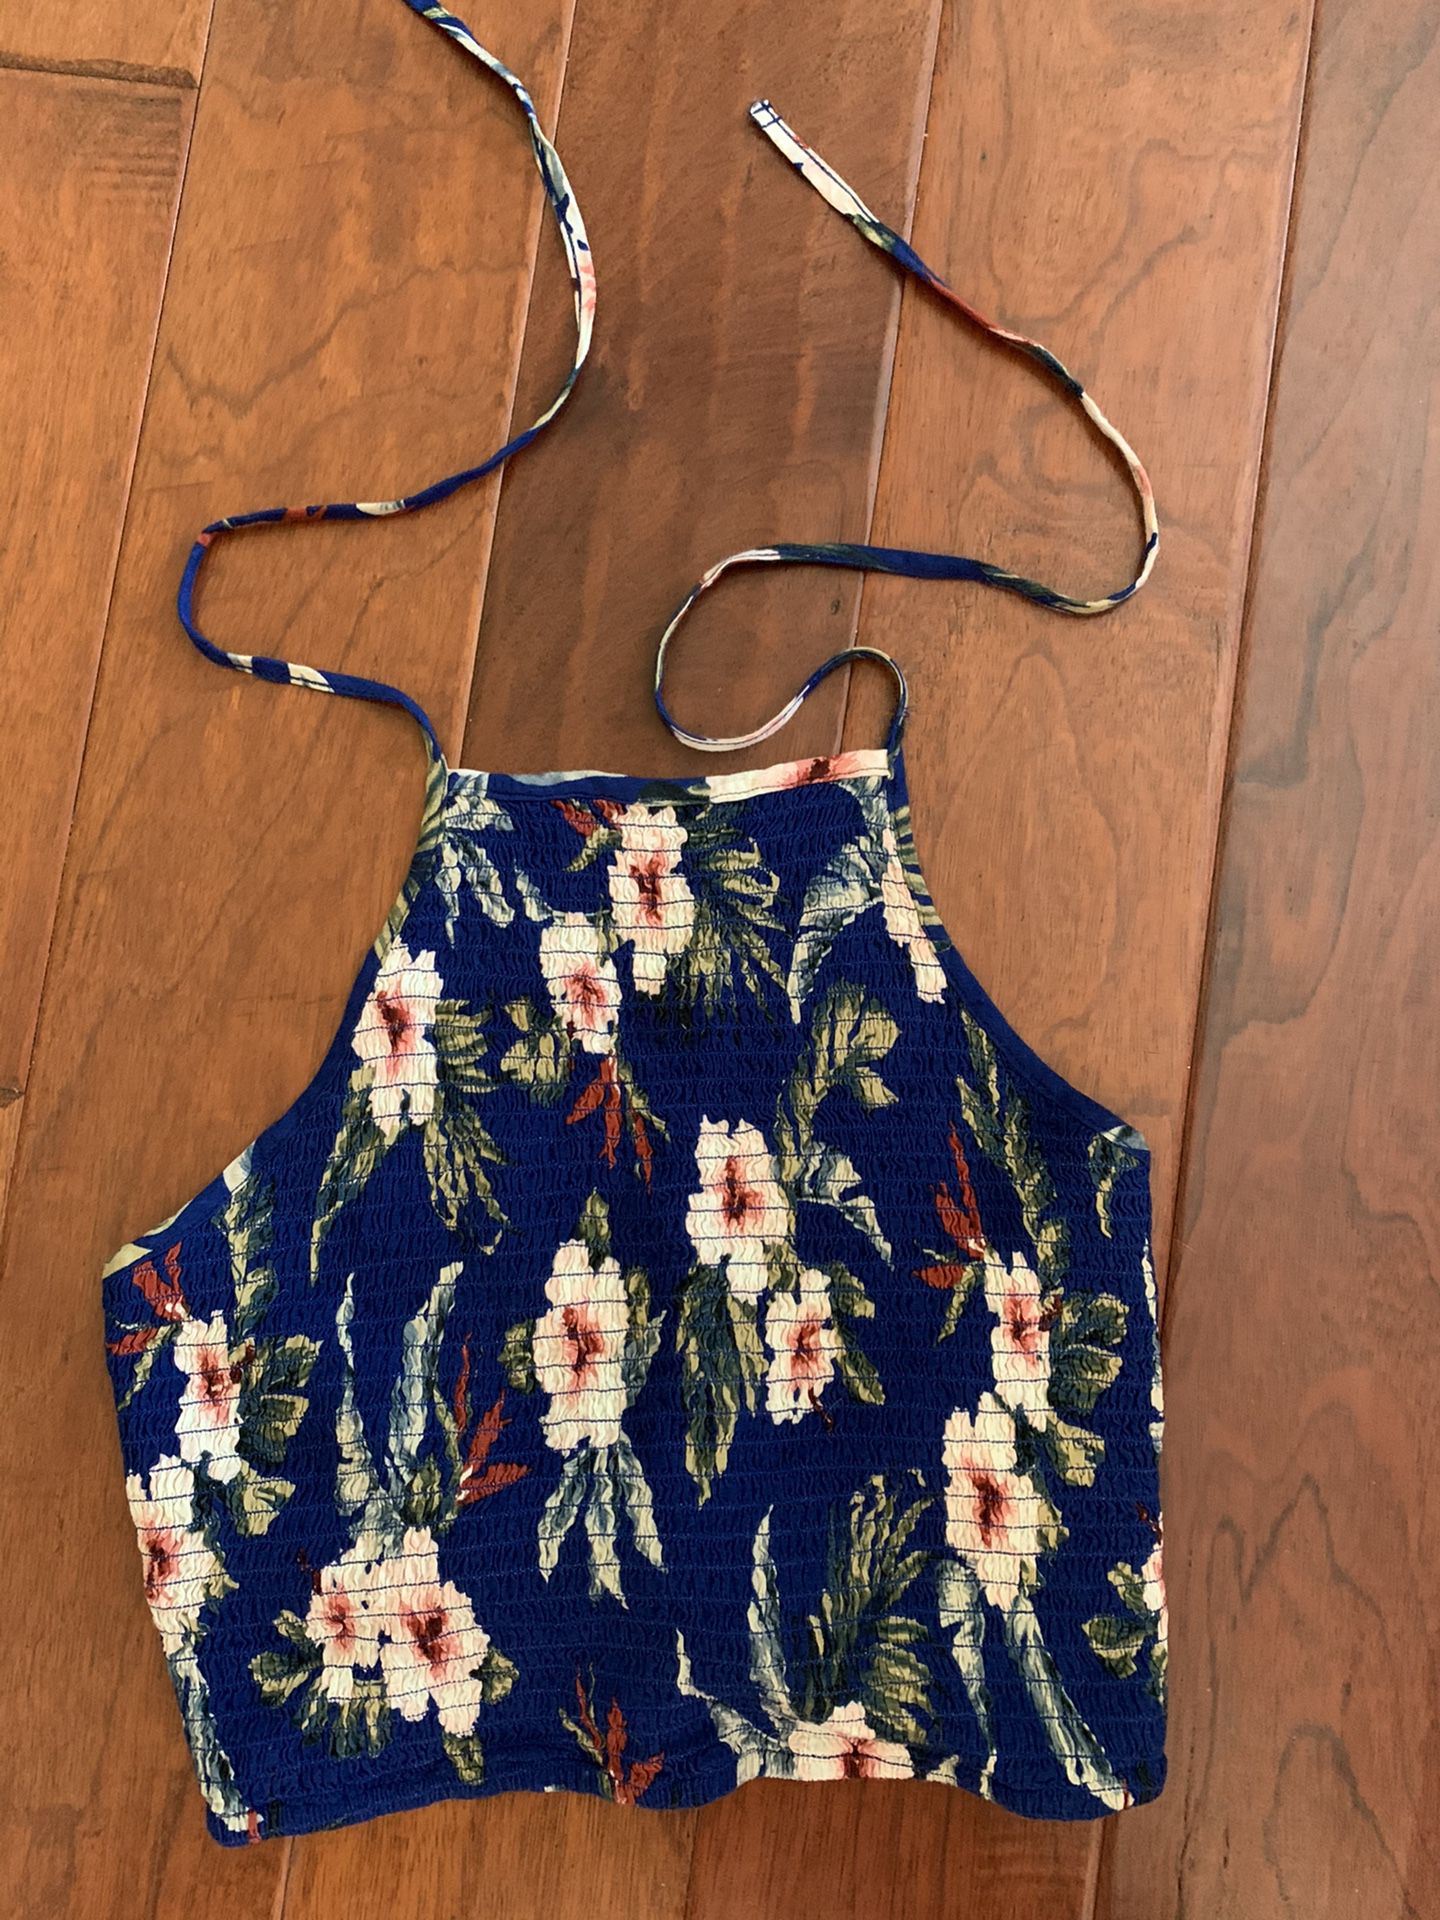 New Hollister pretty blue with flowers halter top